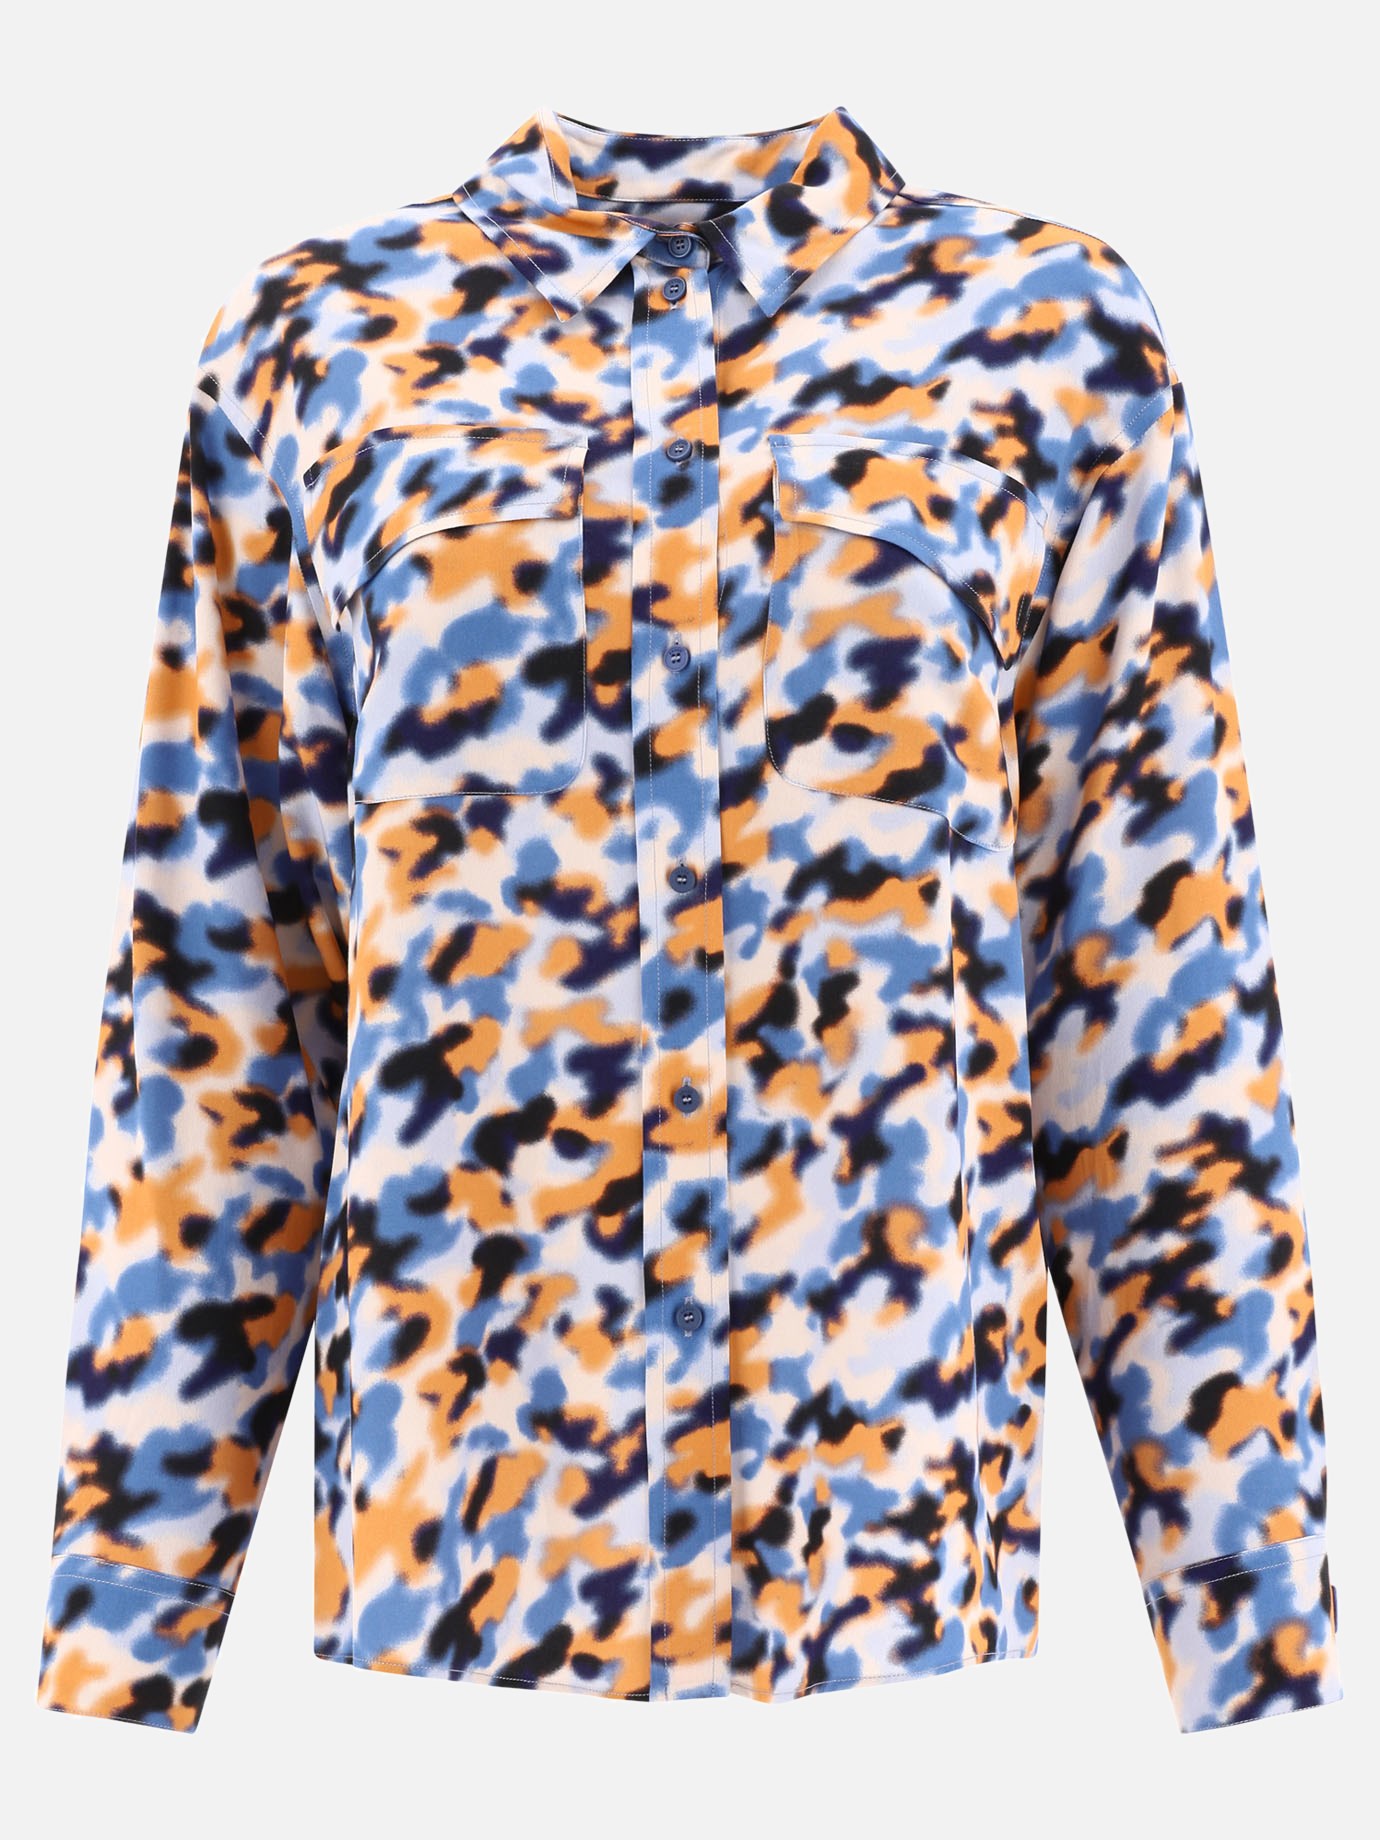 Camouflage shirt by Kenzo